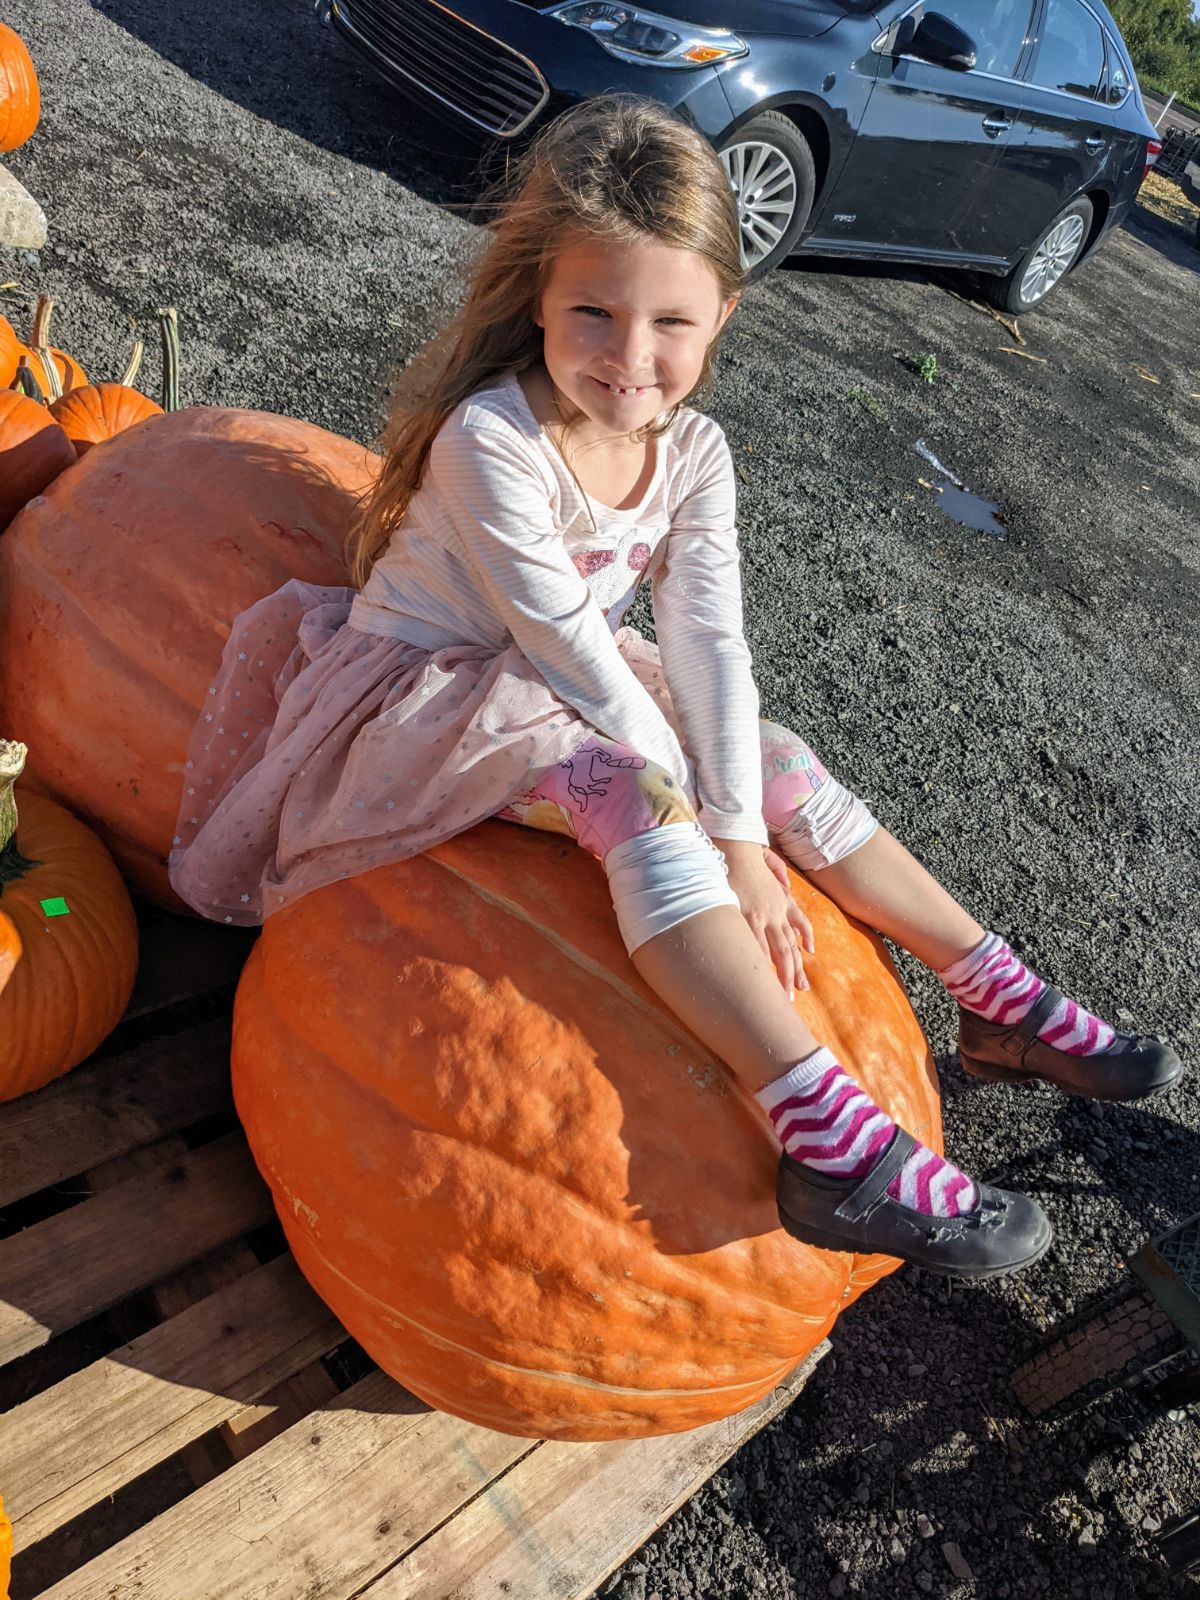 Daughter sitting on a big pumpkin at a roadside stand